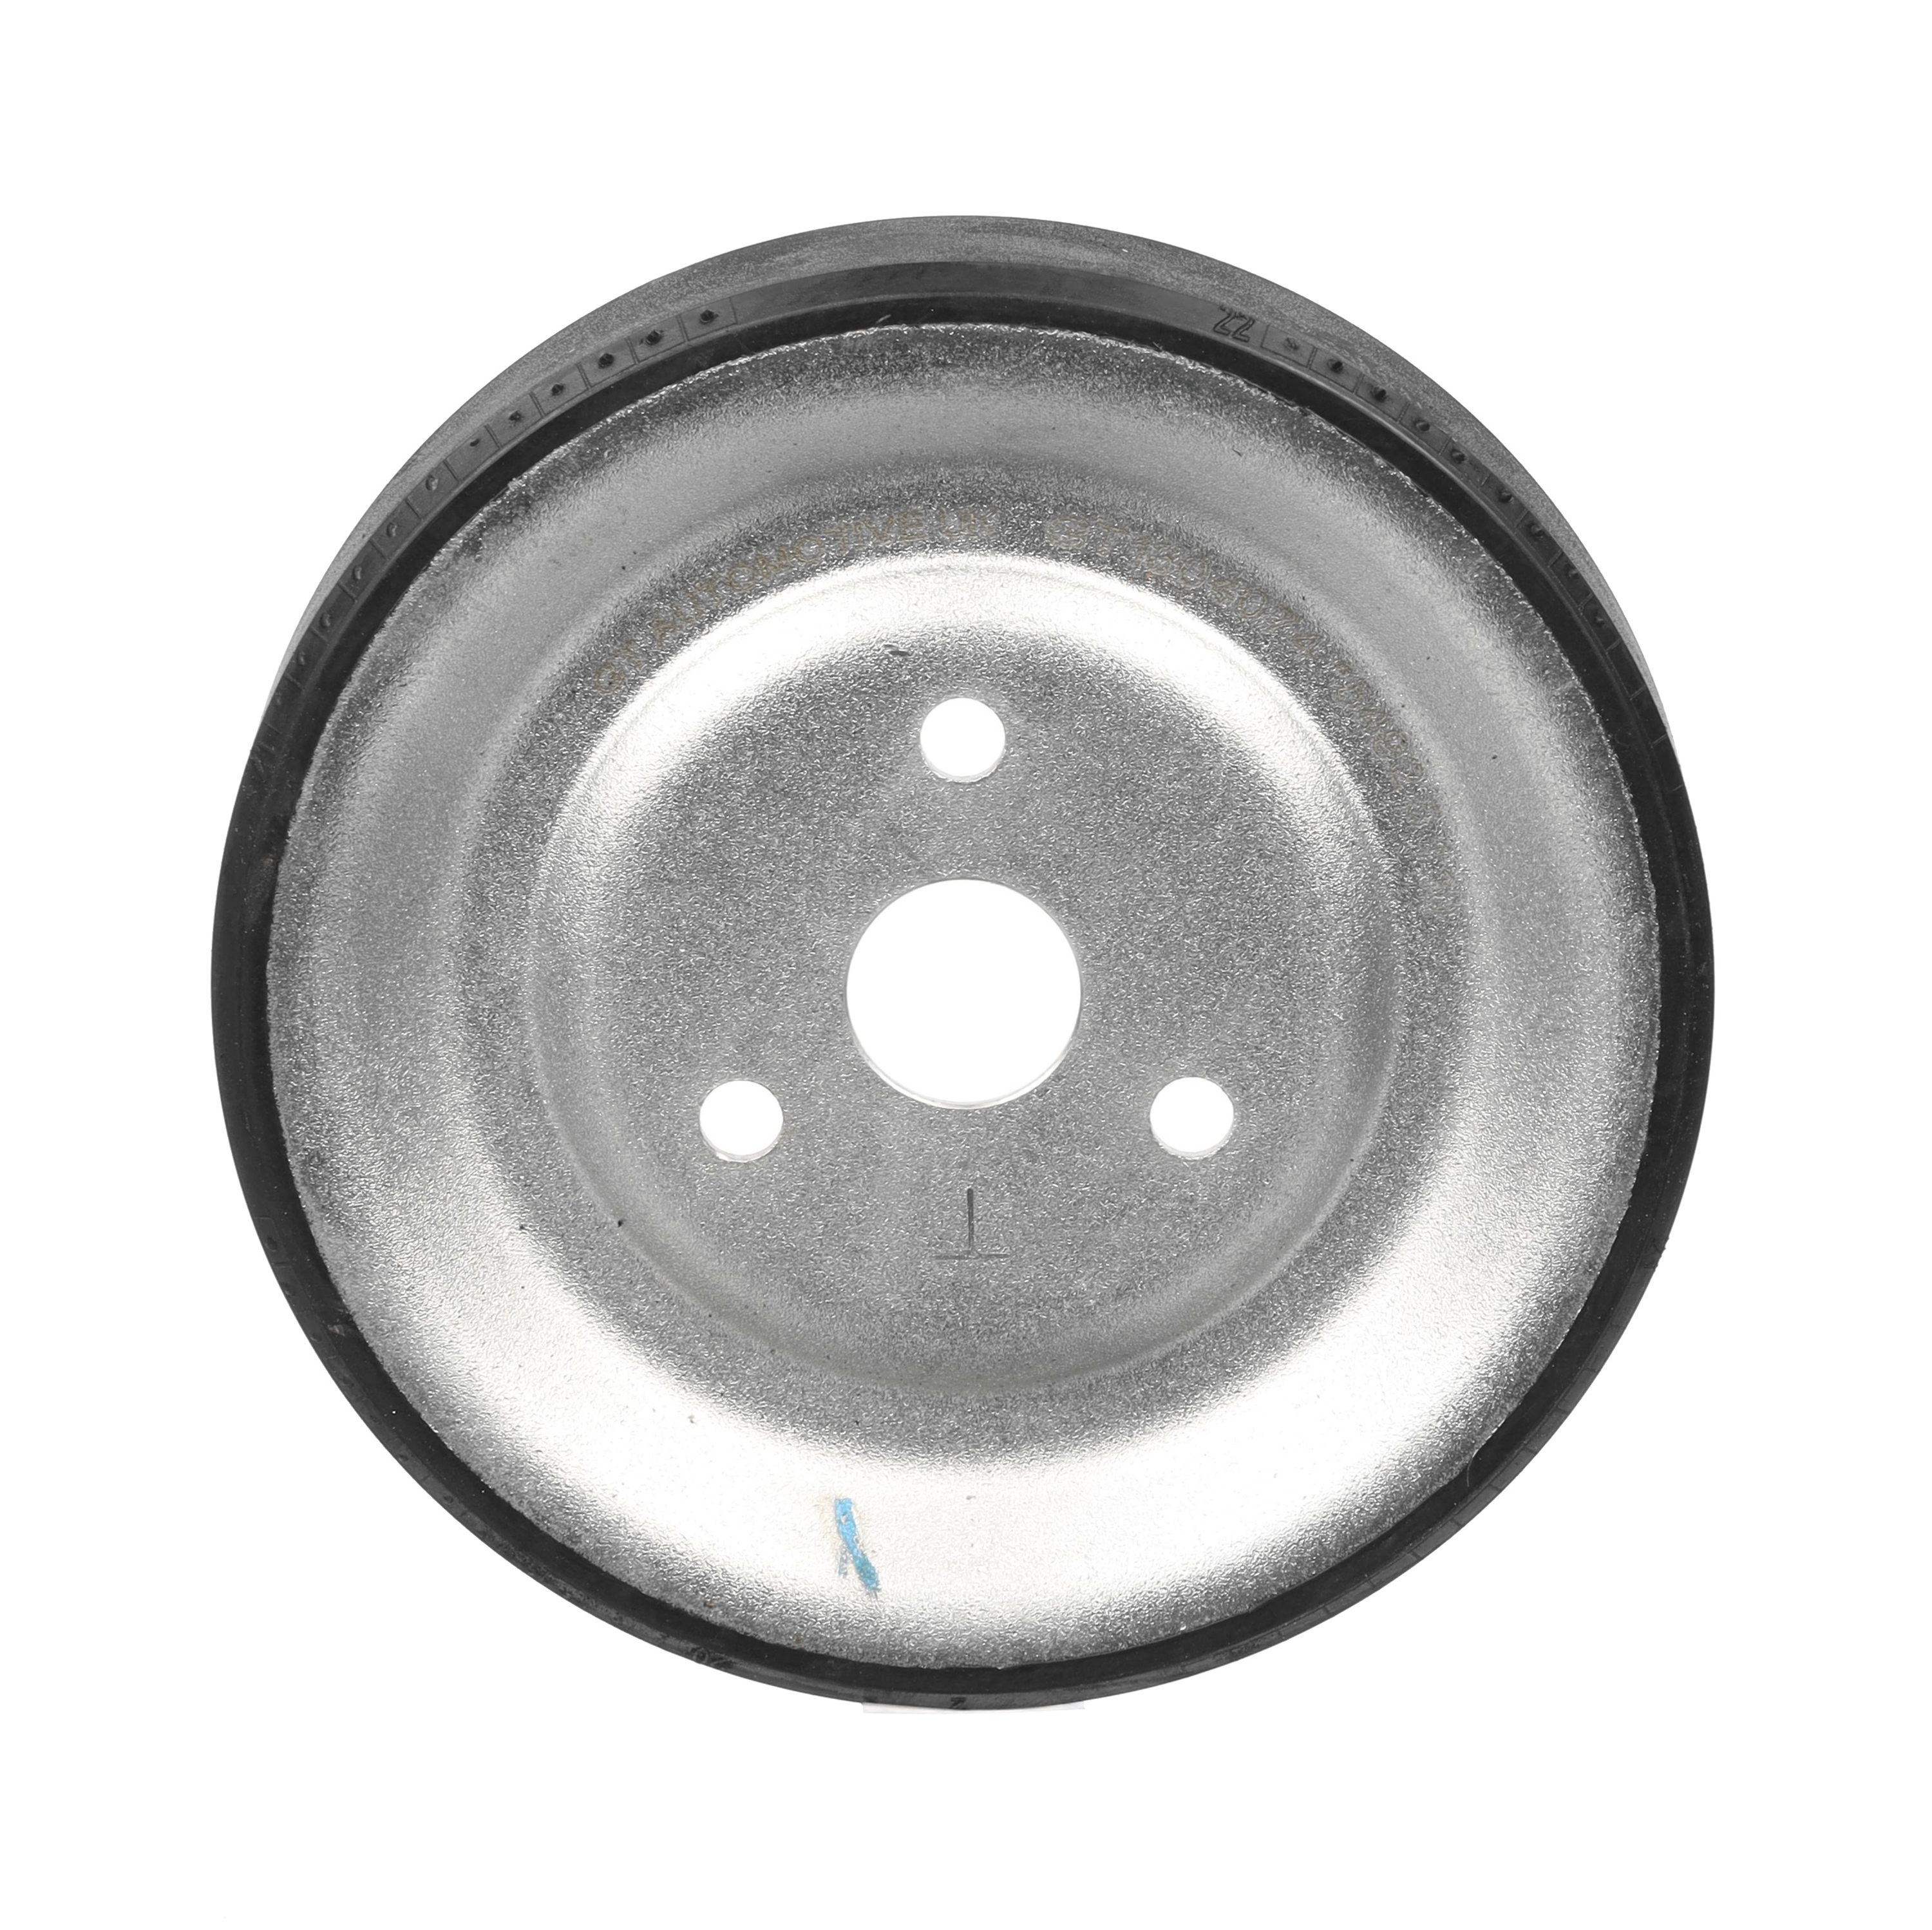 Volkswagen Water pump pulley ET ENGINETEAM PC0023 at a good price